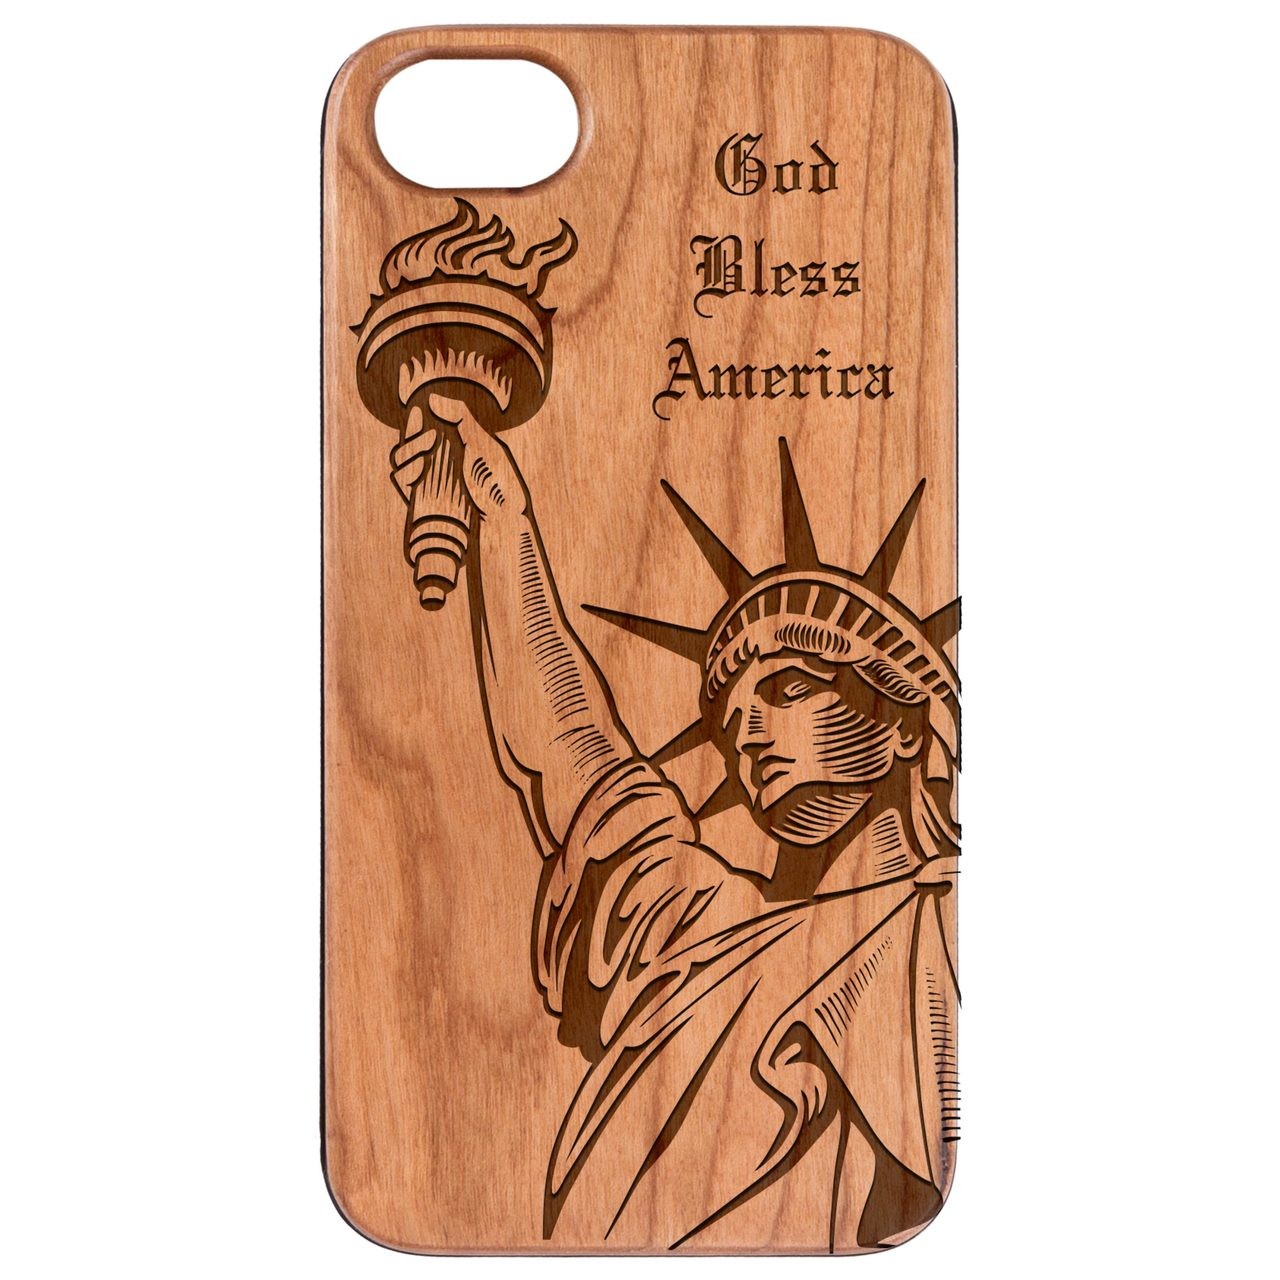  Statue of Liberty - Engraved - Wooden Phone Case - IPhone 13 Models